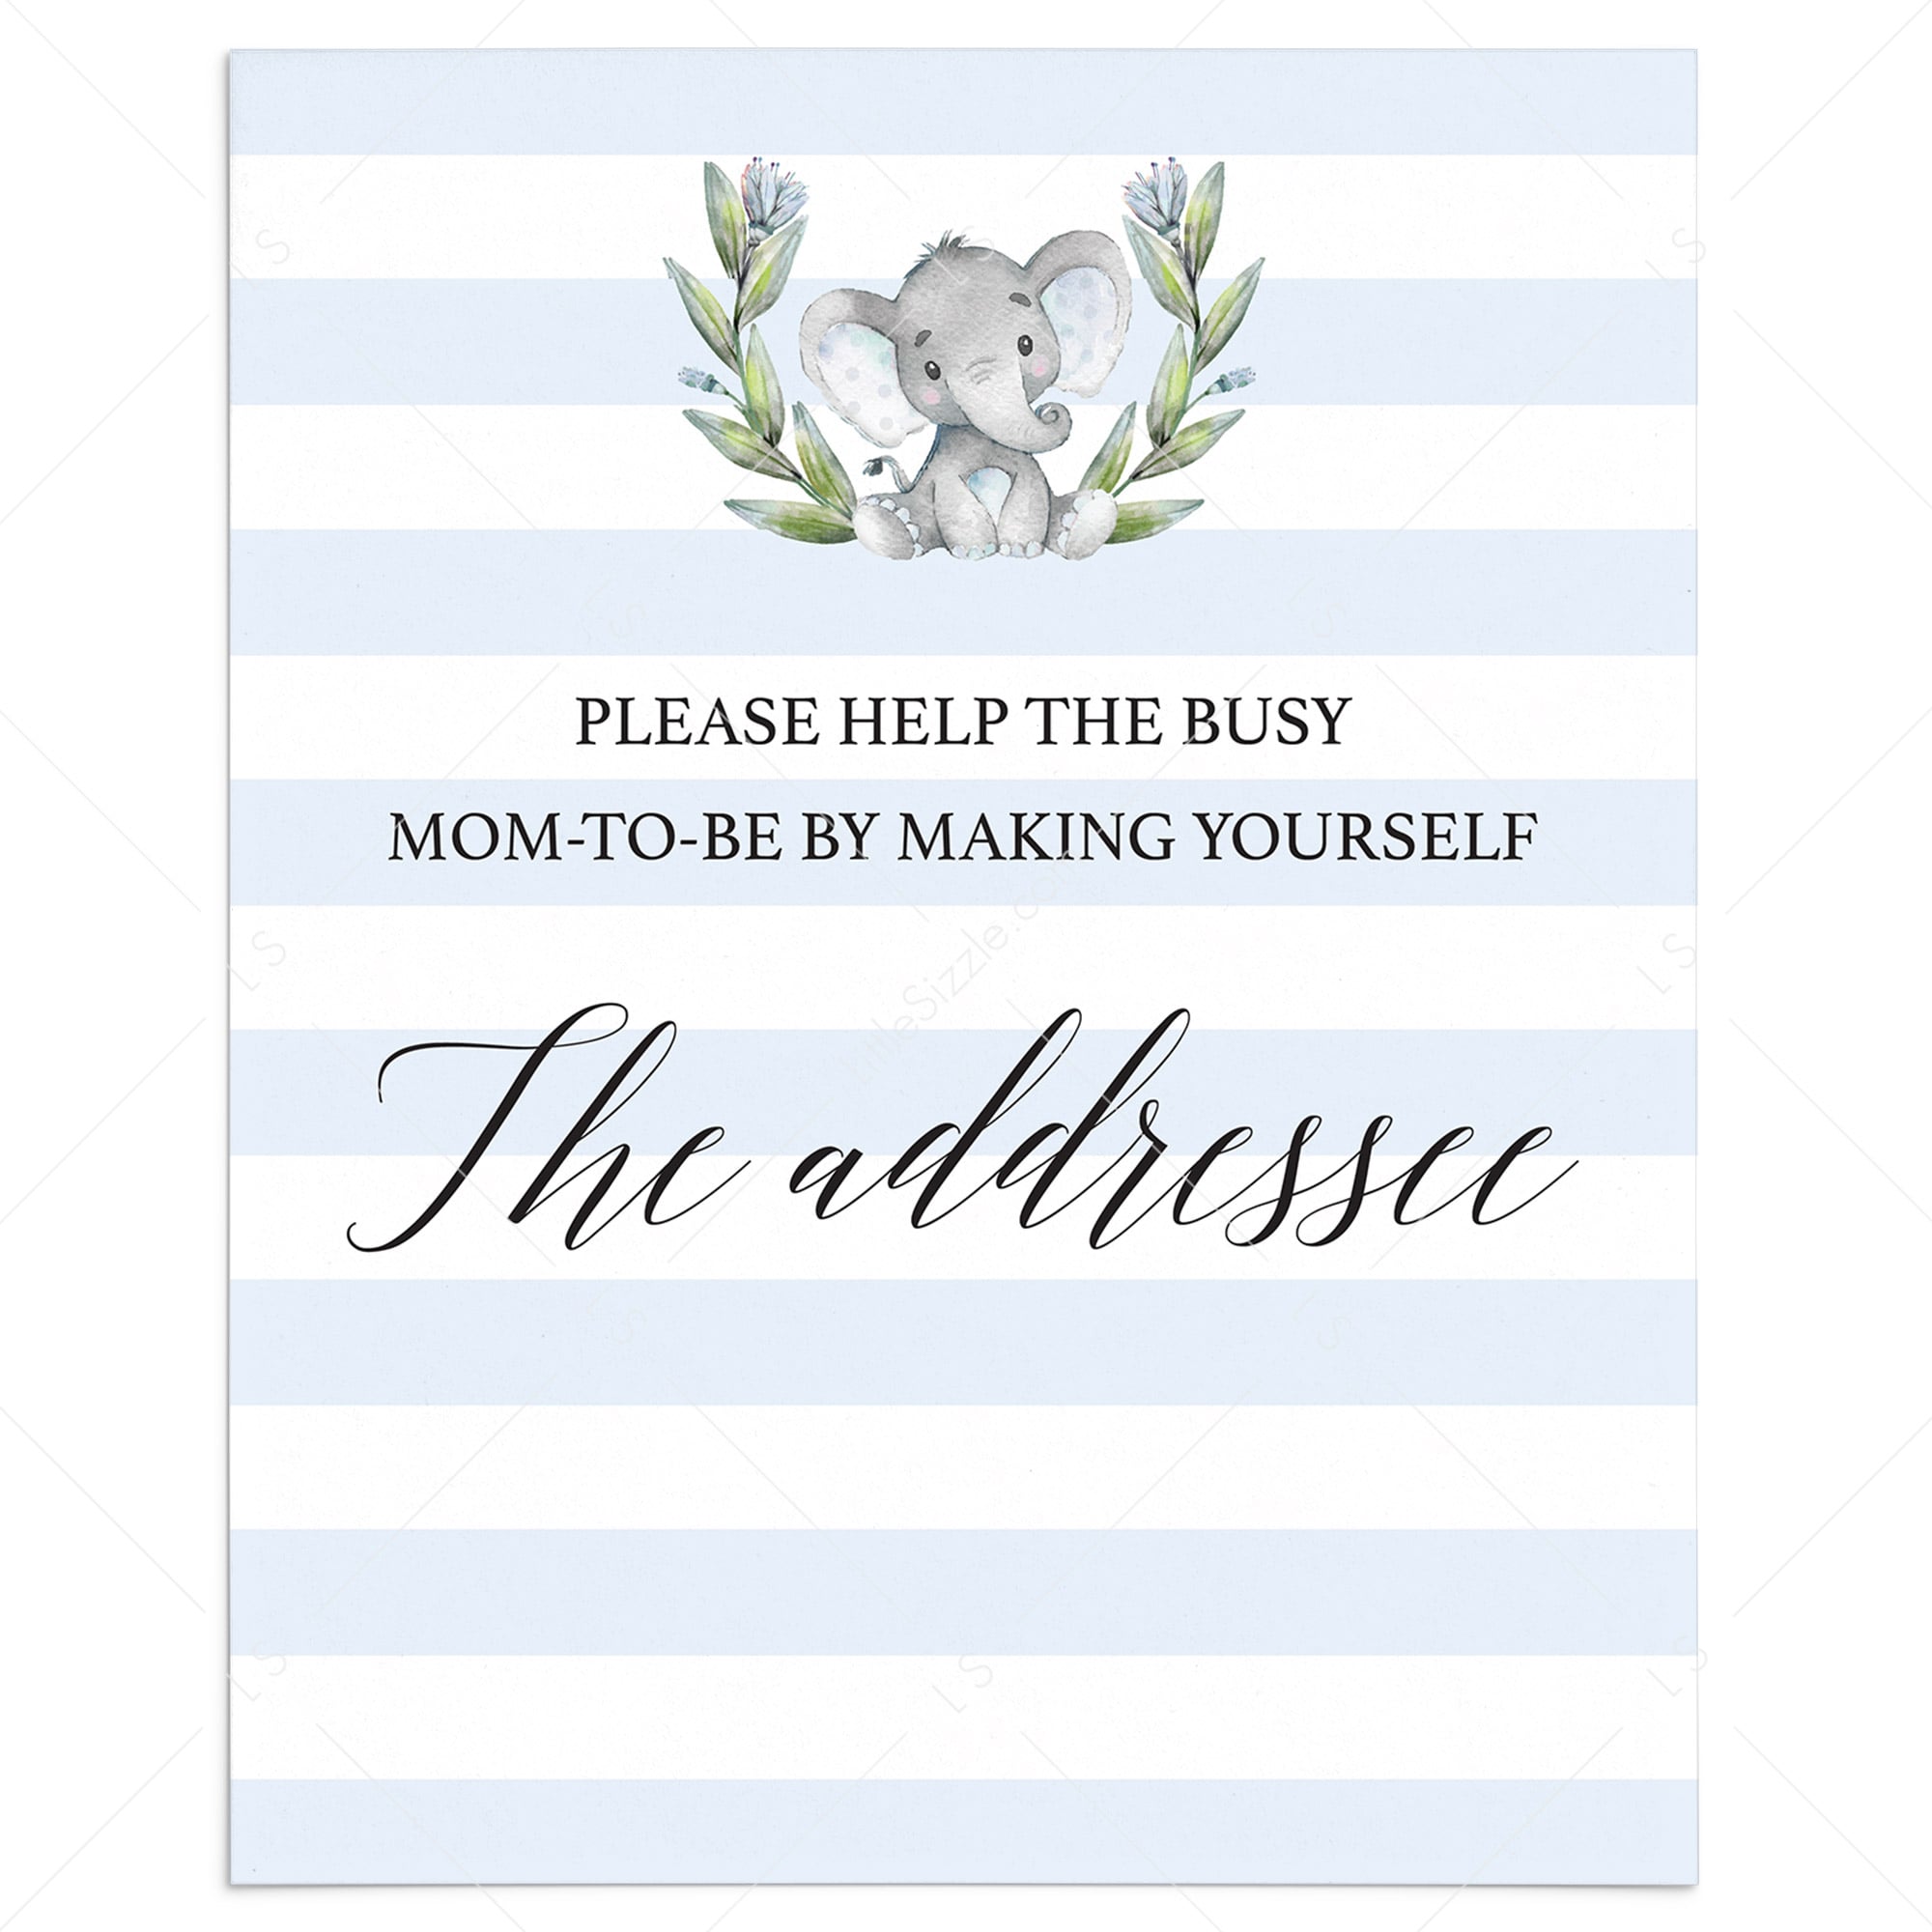 Address request sign for boy baby shower printable by LittleSizzle